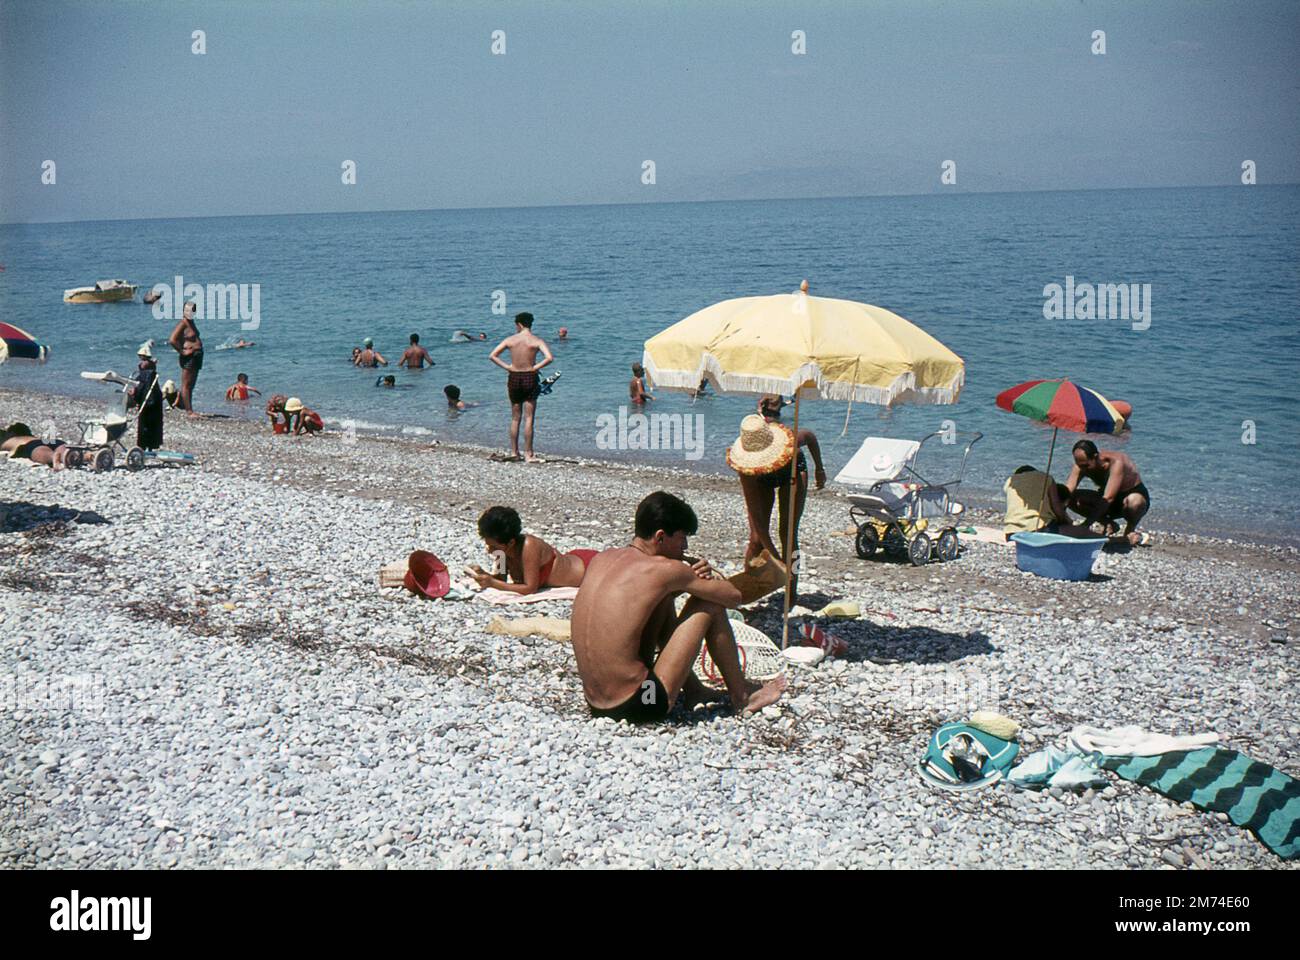 Xylokastro, Greece. August 1963. Tourists and local families relaxing on the beach at the seaside town of Xylokastro in Corinthia in the Peloponnese, Greece. The visitors are sunbathing and sheltering under parasols, while others are swimming in the Gulf of Corinth. The hills/mountains on the Greek mainland are visible on the horizon. Stock Photo